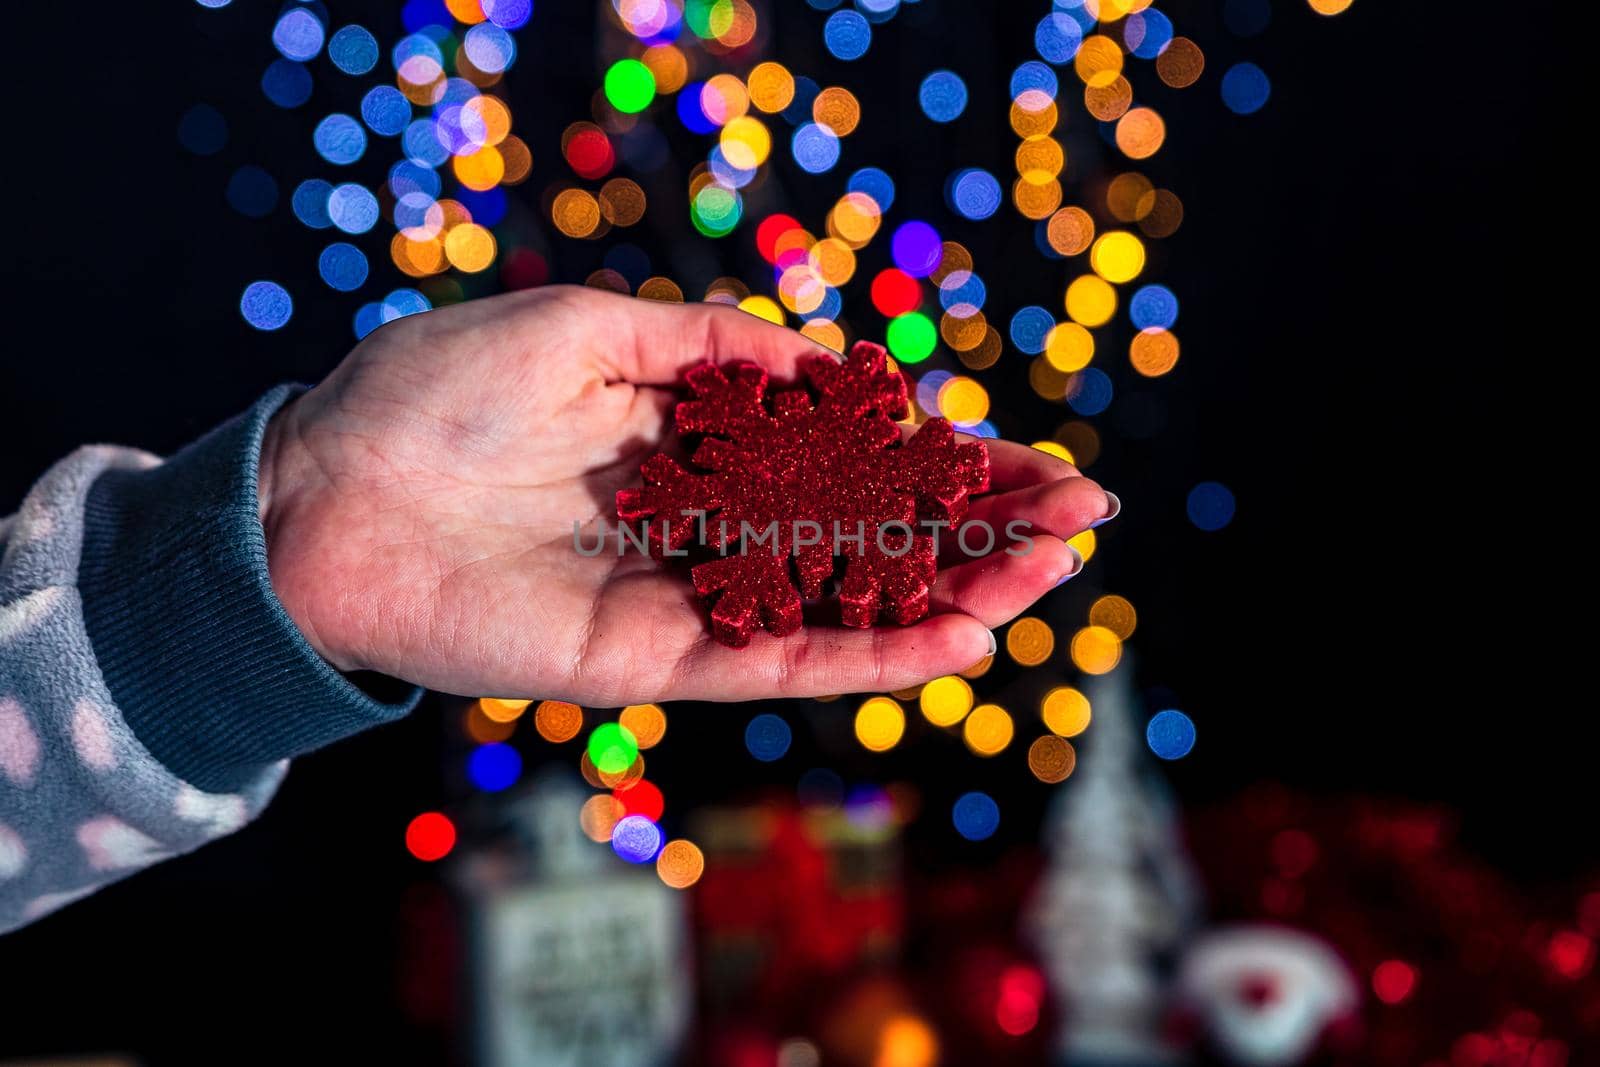 Holding Christmas snowflake decoration isolated on background with blurred lights. December season, Christmas composition.